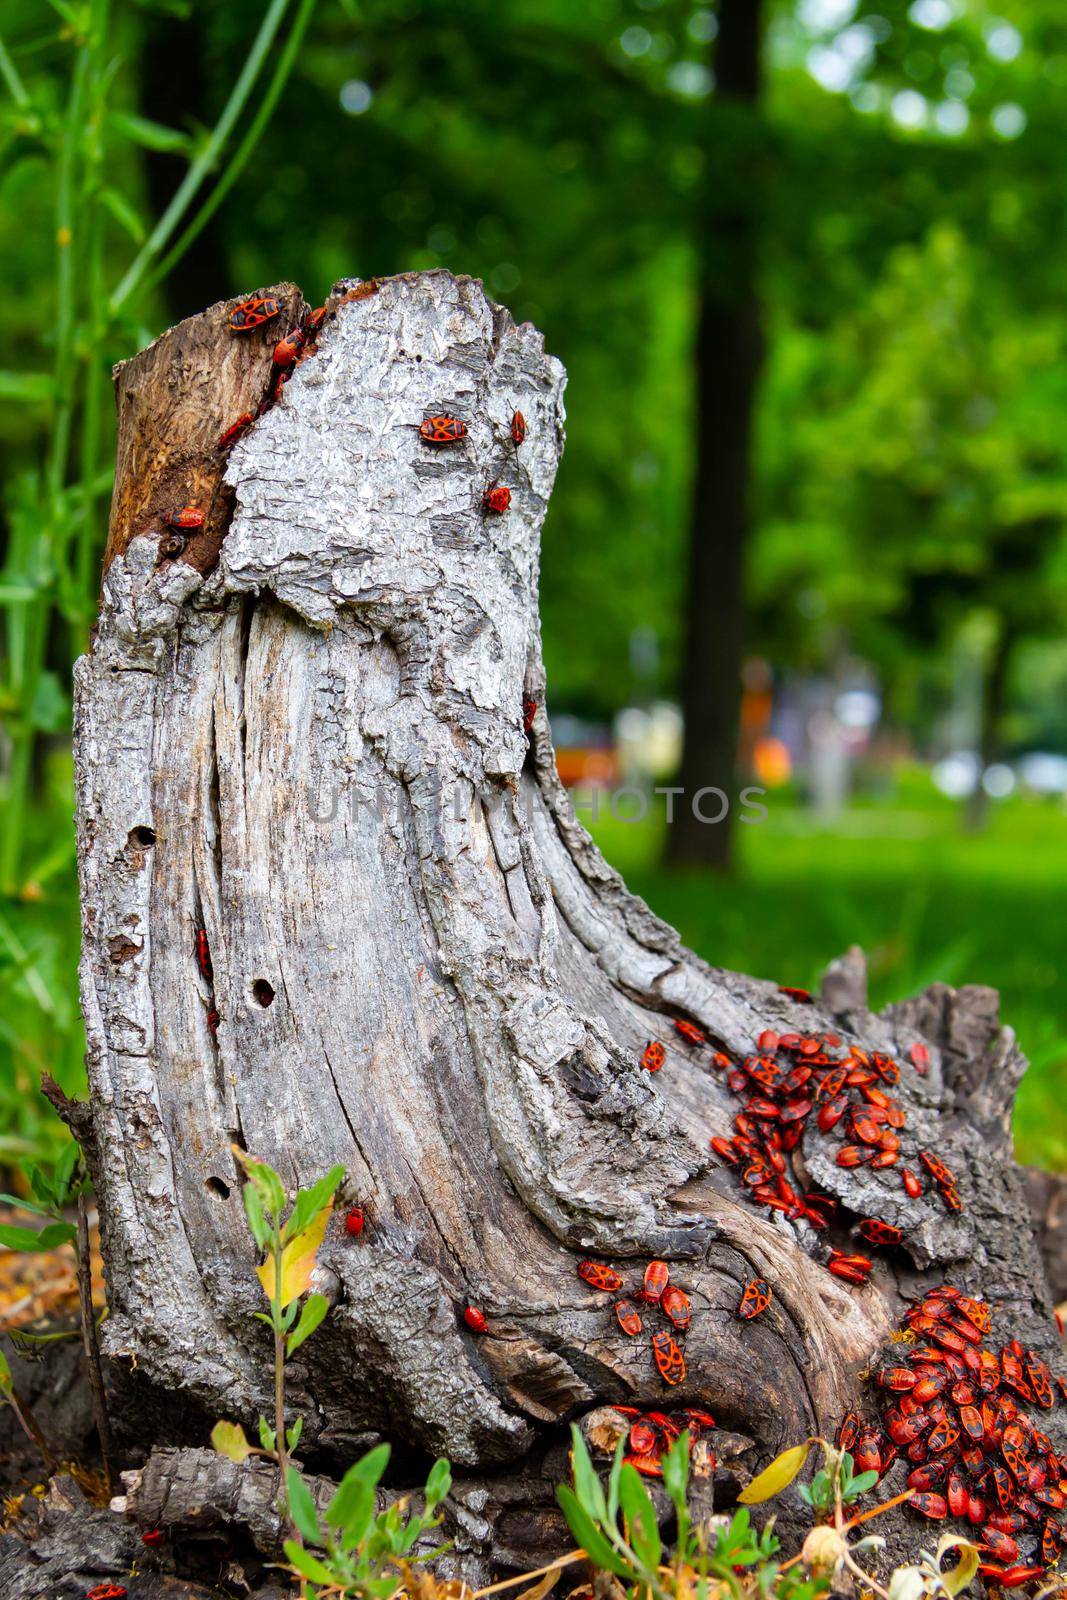 Red beetles. A flock of beetles sits on a stump. insects in the sun. Life in the forest.